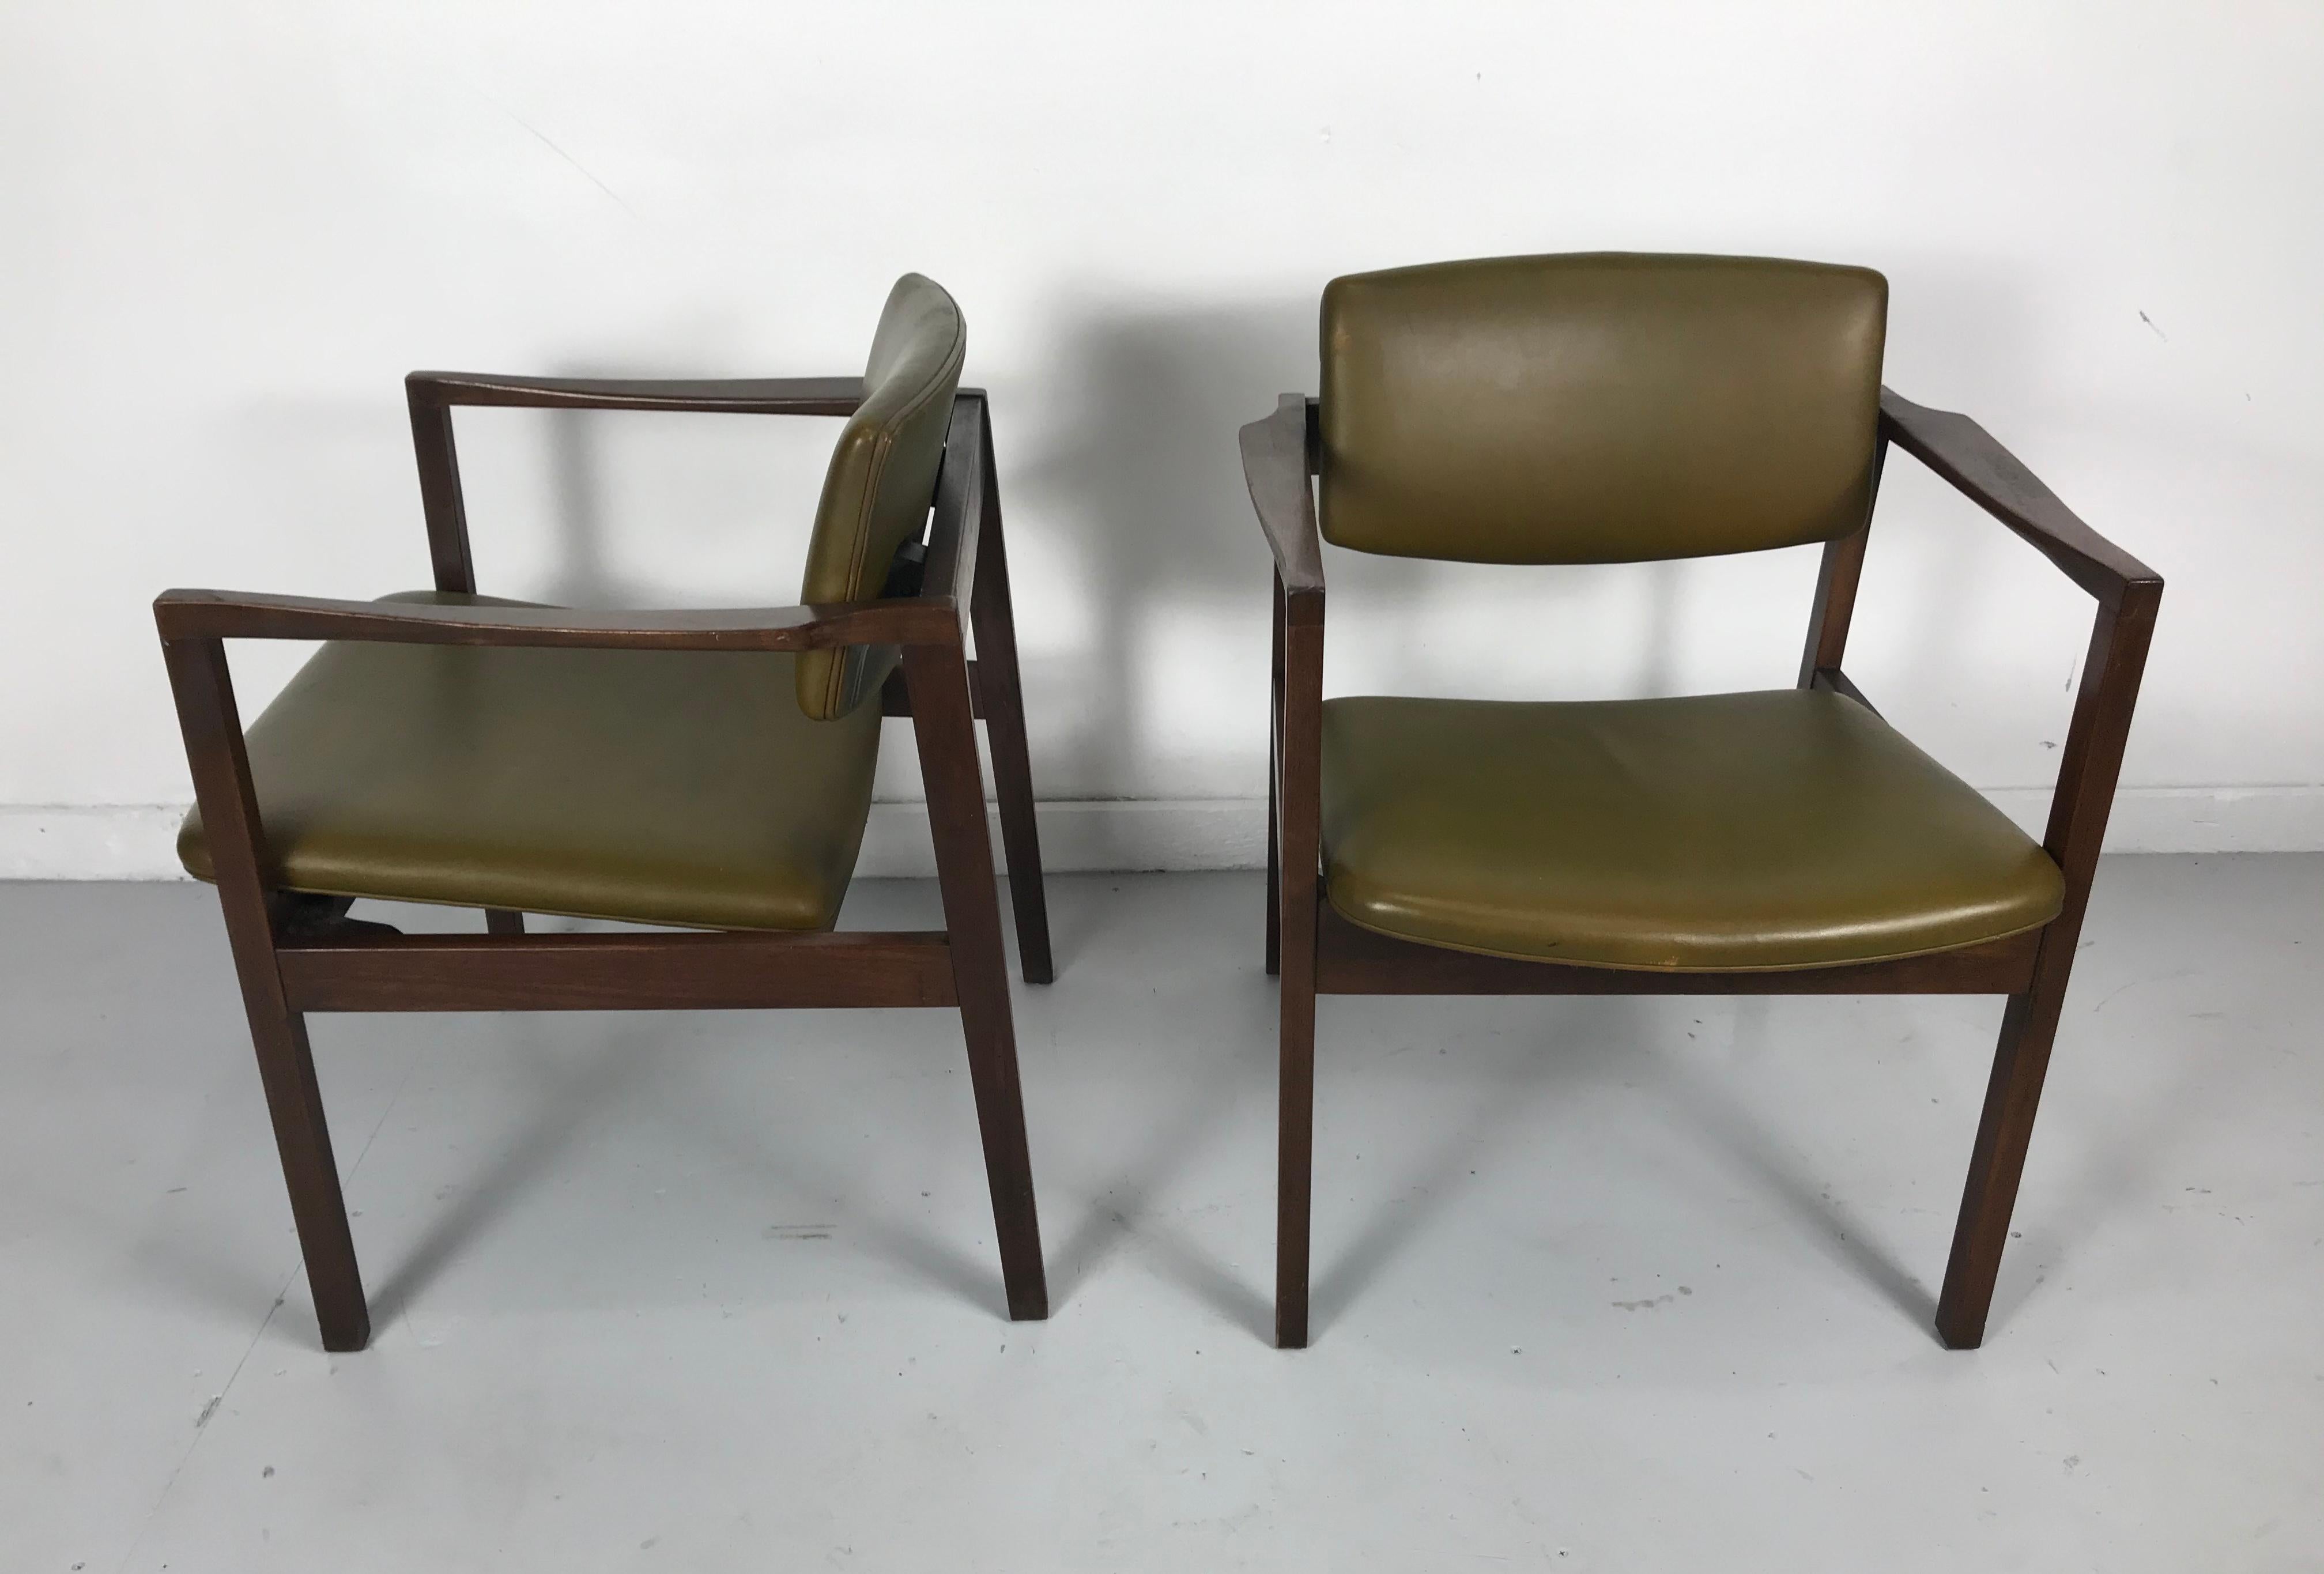 American Stunning Pair of Stow Davis Walnut Lounge Chairs, Classic Modernist Design For Sale